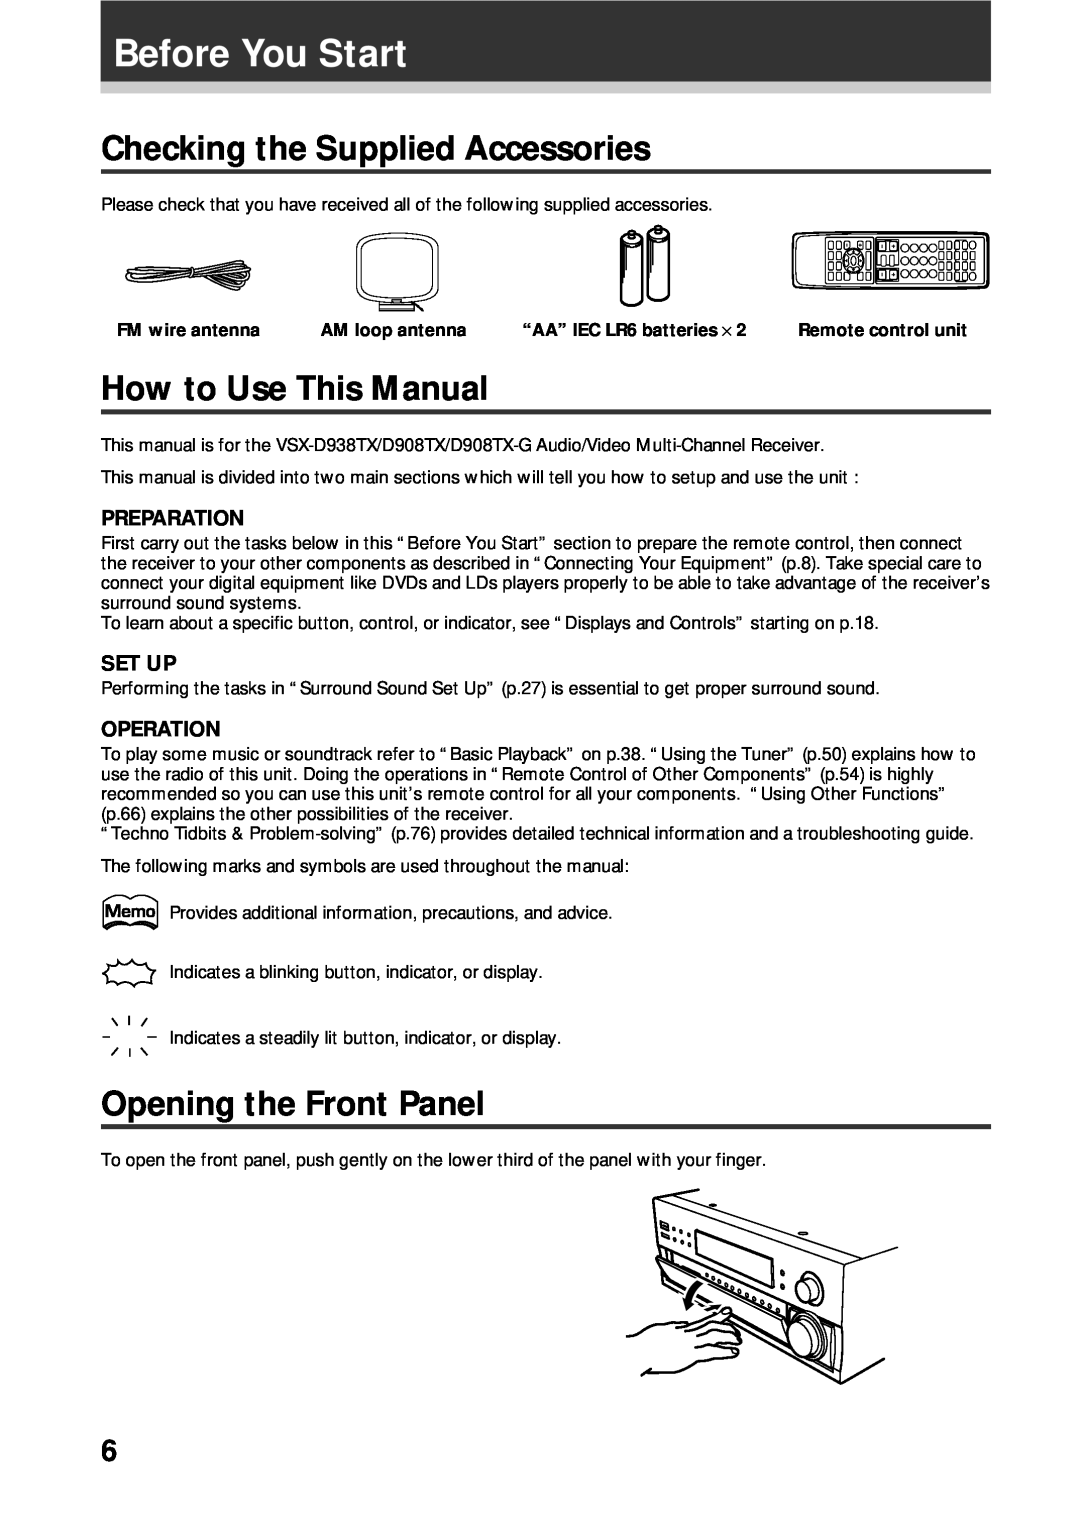 Pioneer VSX-D938TX Before You Start, Checking the Supplied Accessories, How to Use This Manual, Opening the Front Panel 